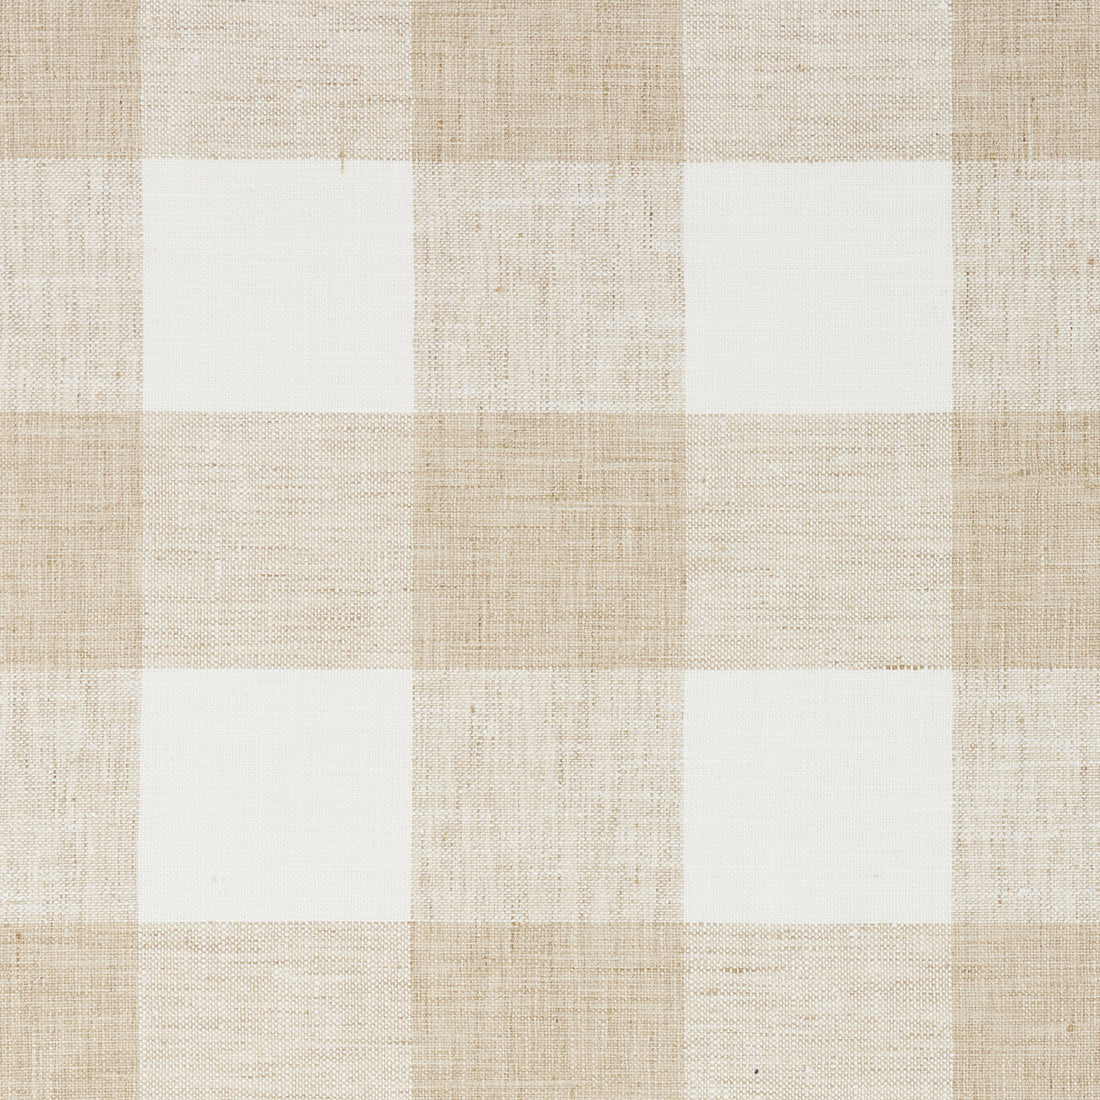 Kravet Basics fabric in 34090-161 color - pattern 34090.161.0 - by Kravet Basics in the Bungalow Chic II collection